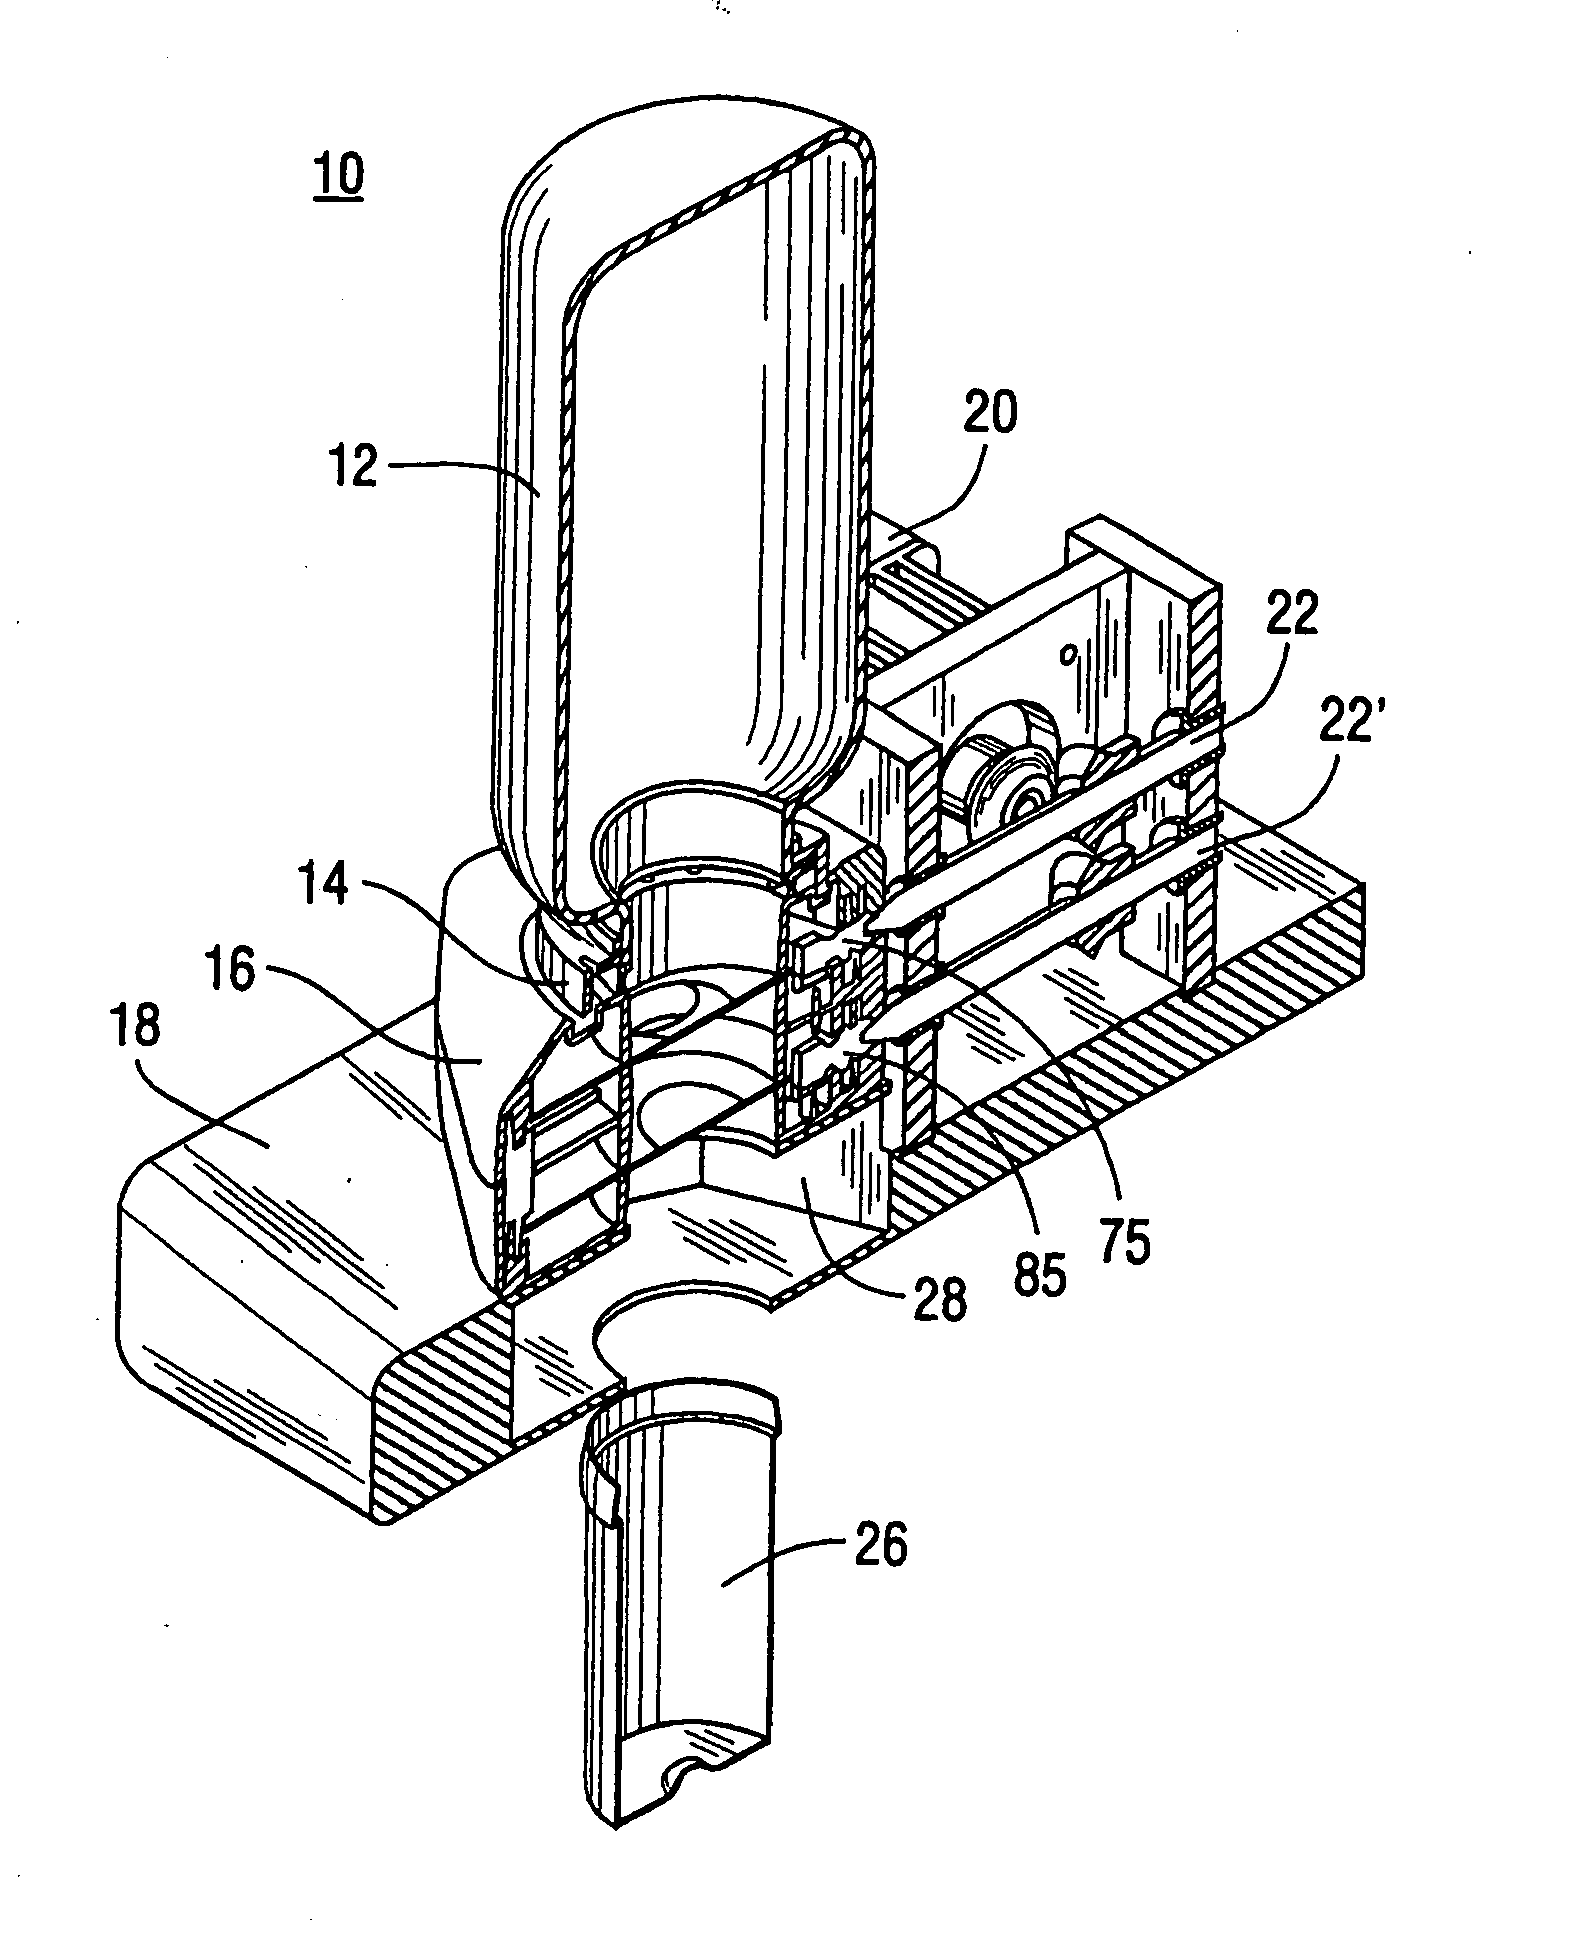 Article dispensing and counting method and device